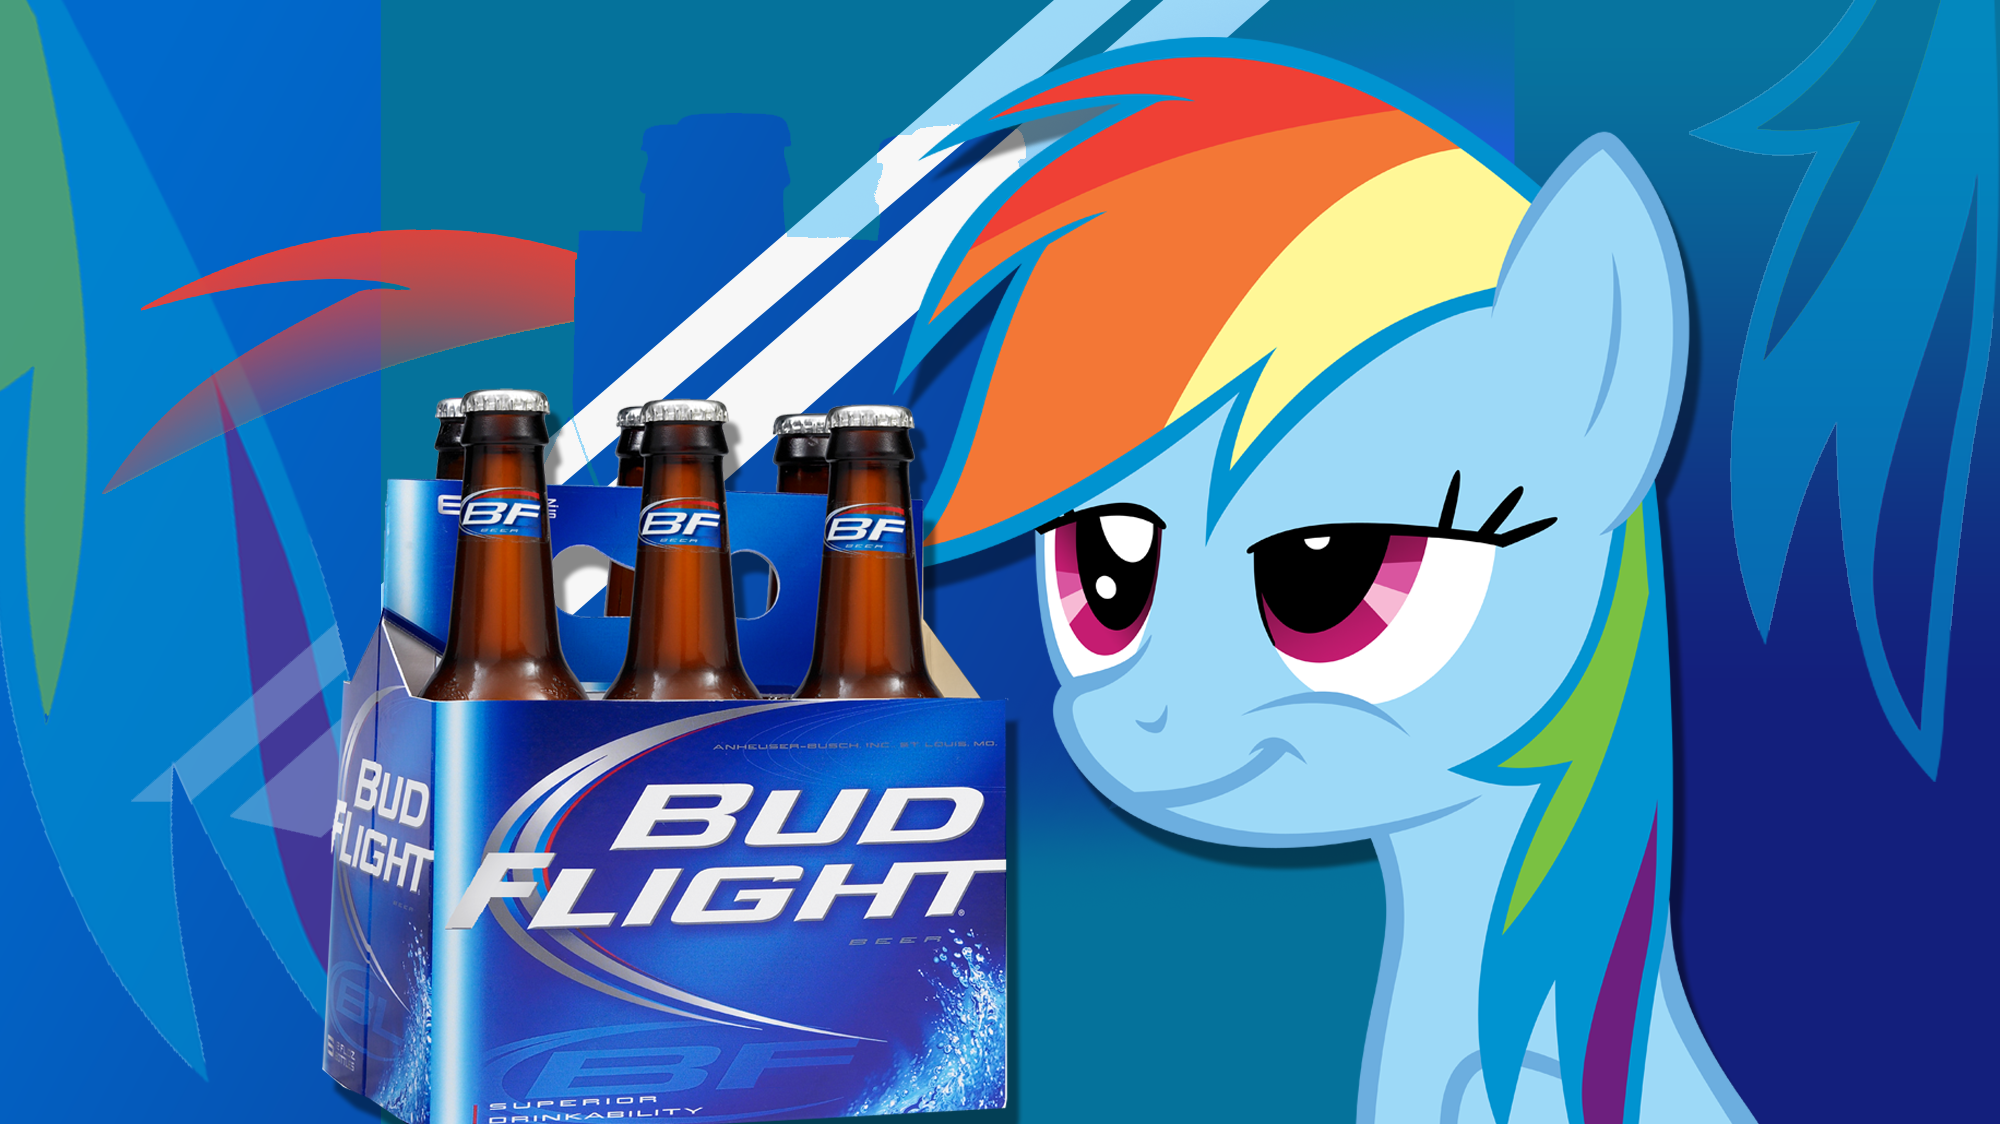 What Do Ponies Drink? - Rainbow Dash by 4Suit and Bernd01